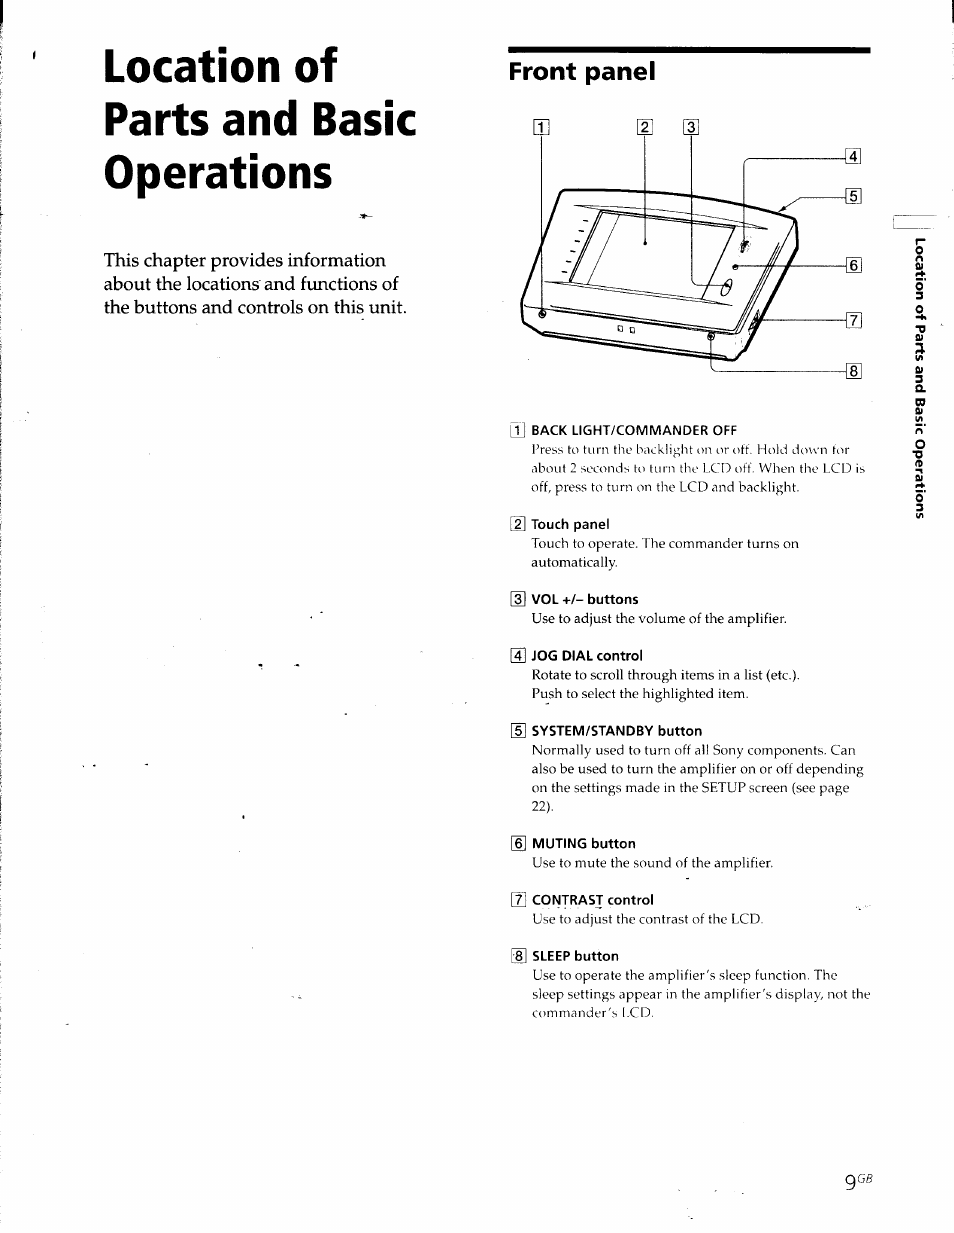 Location of parts and basic operations, Ll] back light/commander off, 2] touch panel | Vol +/- buttons, 3] jog dial control, I] system/standby button, 6] muting button, 7] contrast control, 8] sleep button, Front panel | Sony RM-TP501E Manuel d'utilisation | Page 9 / 49